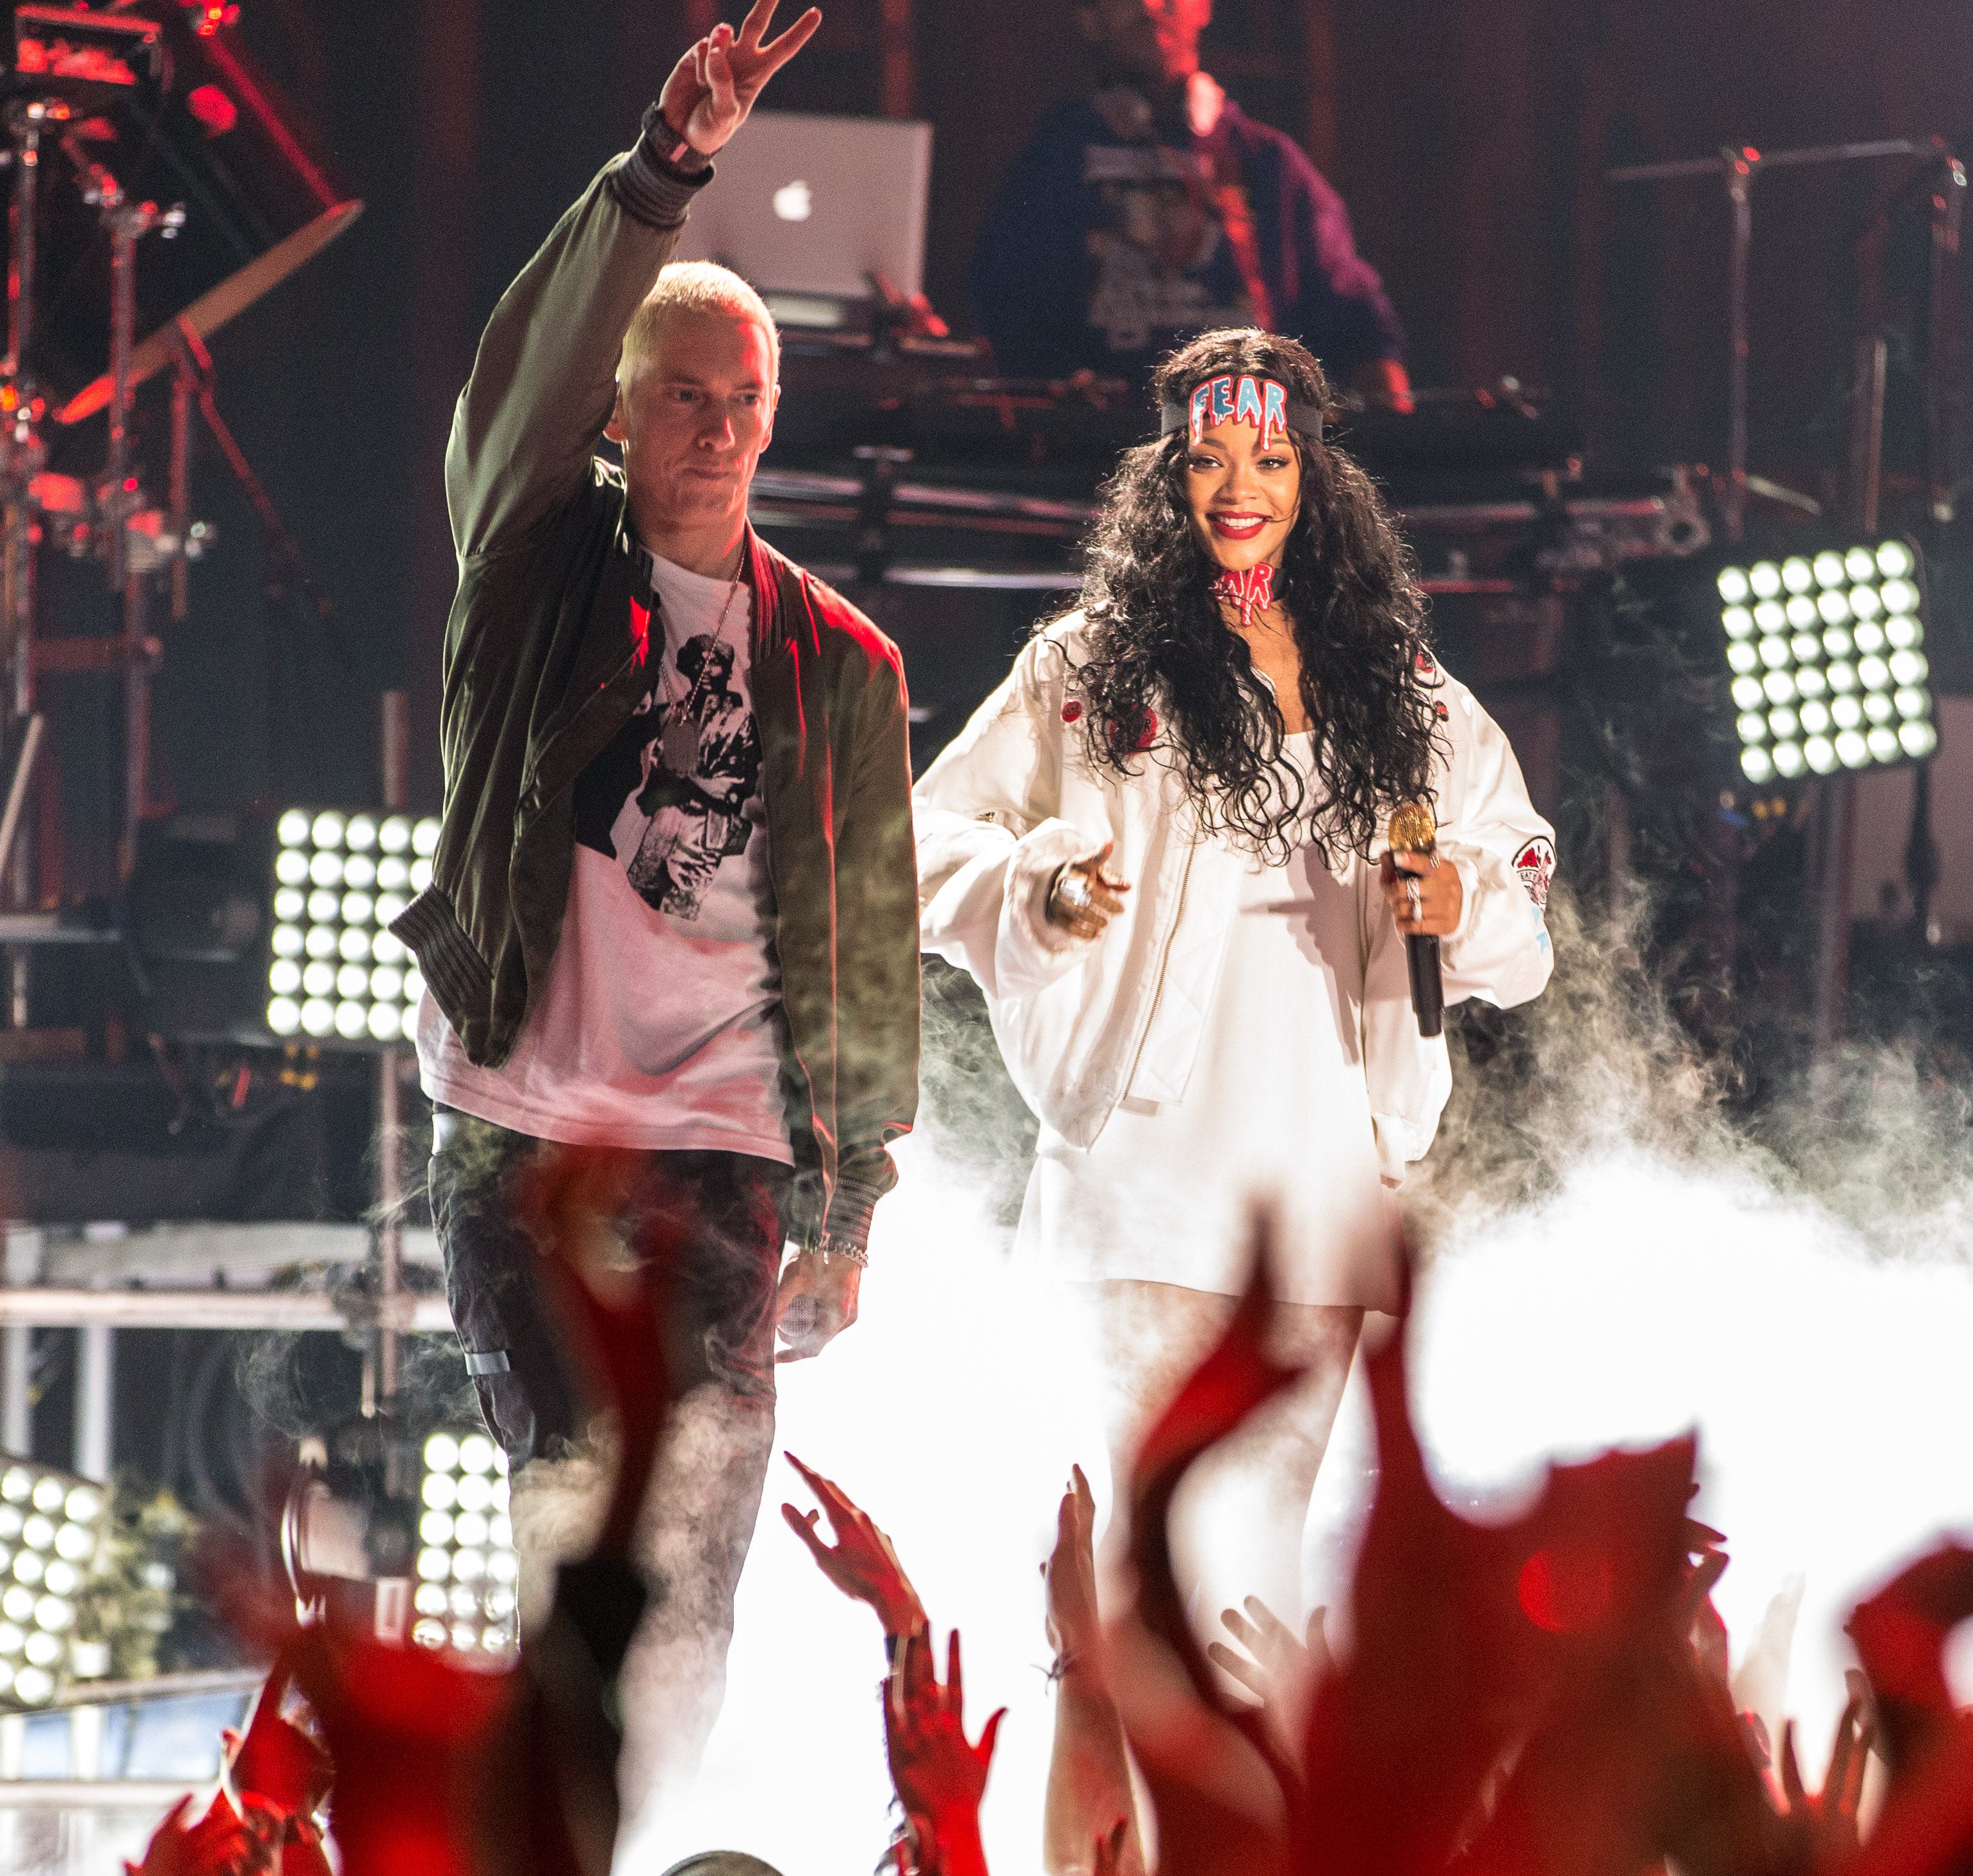 Eminem and Rihanna perform onstage at the 2014 MTV Movie Awards at Nokia Theatre L.A. Live on April 13, 2014 in Los Angeles, California.